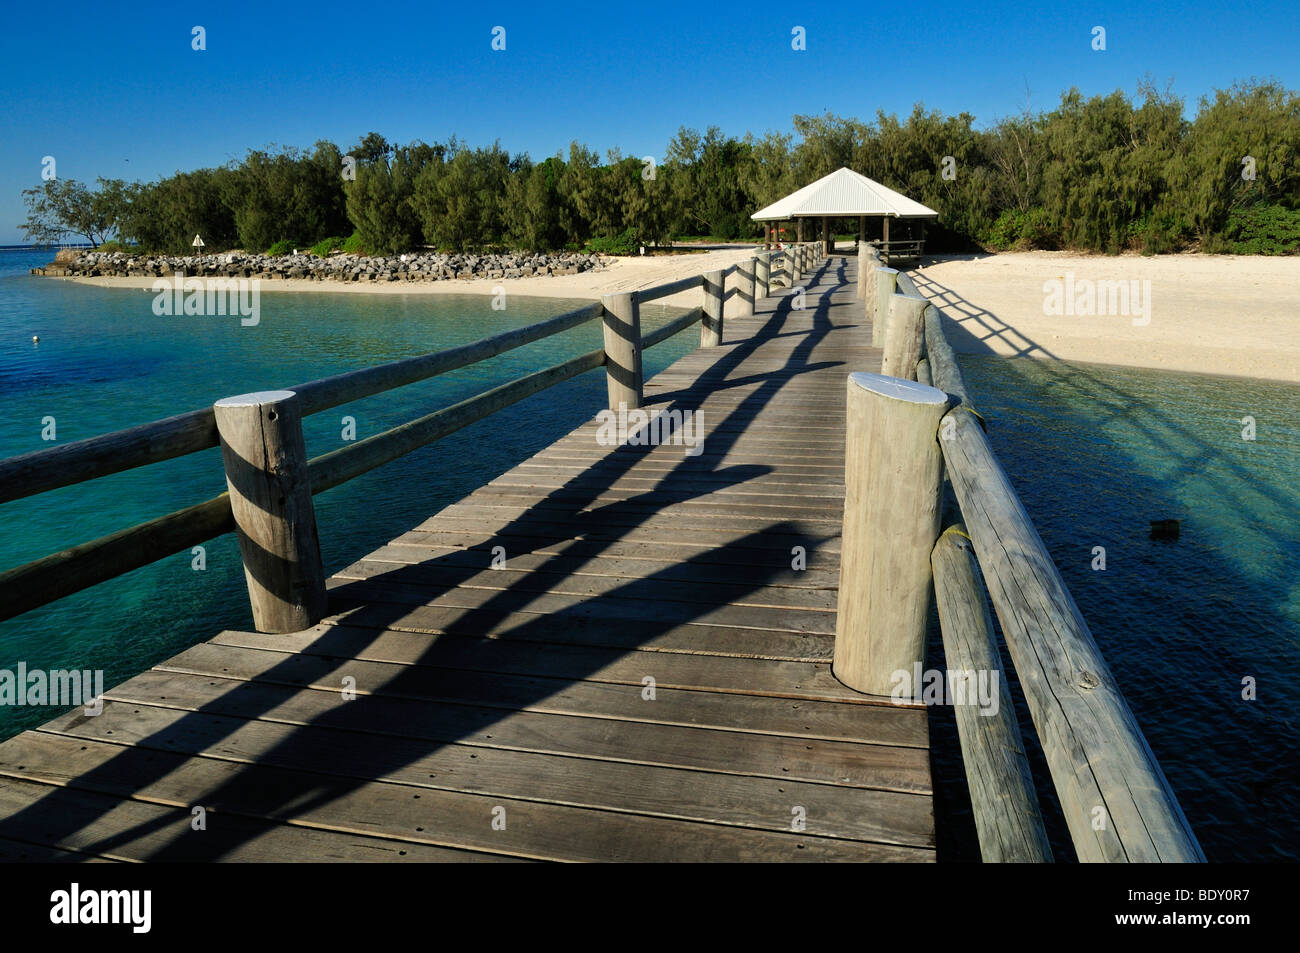 Boat jetty on Heron Island, Capricornia Cays National Park, Great Barrier Reef, Queensland, Australia Stock Photo